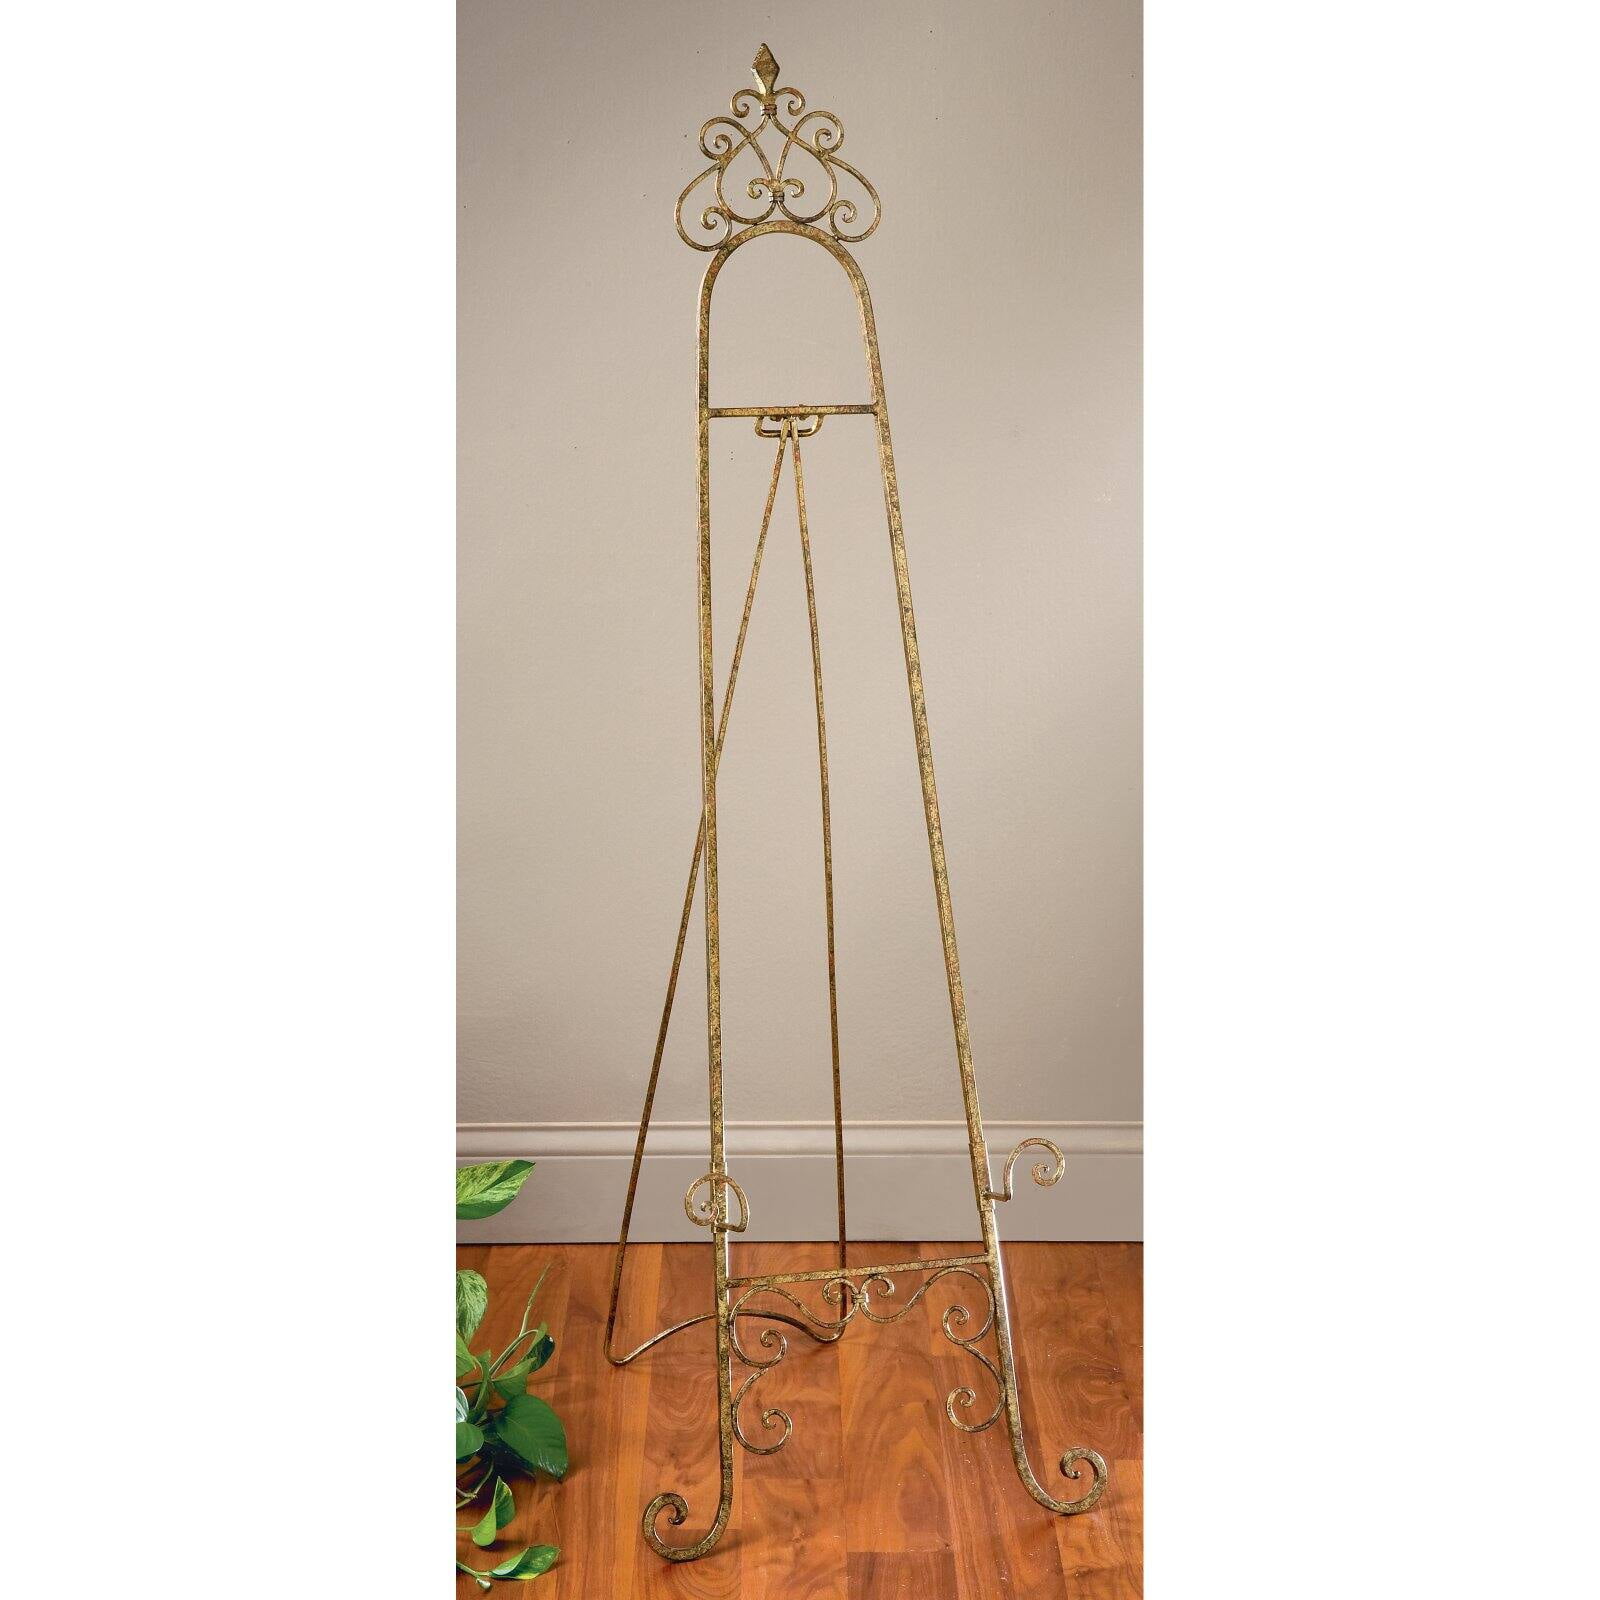 Antique Gold New Free Shipping Floor easel 